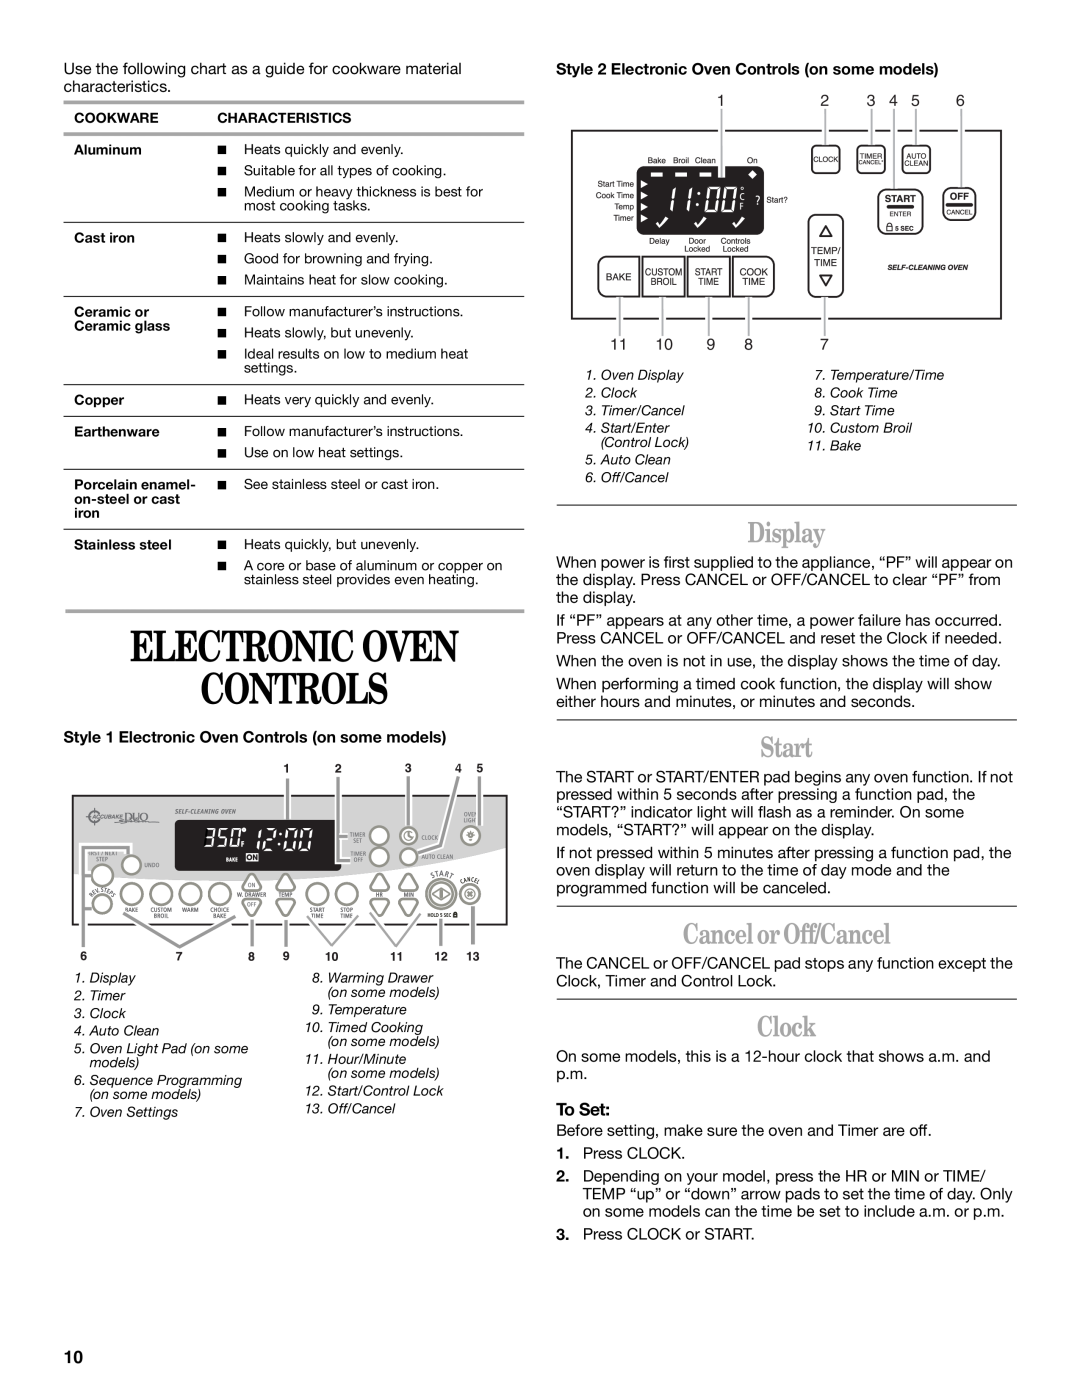 Whirlpool 9754384 manual Electronic Oven Controls, Display, Start, Cancel or Off/Cancel, Clock, To Set 